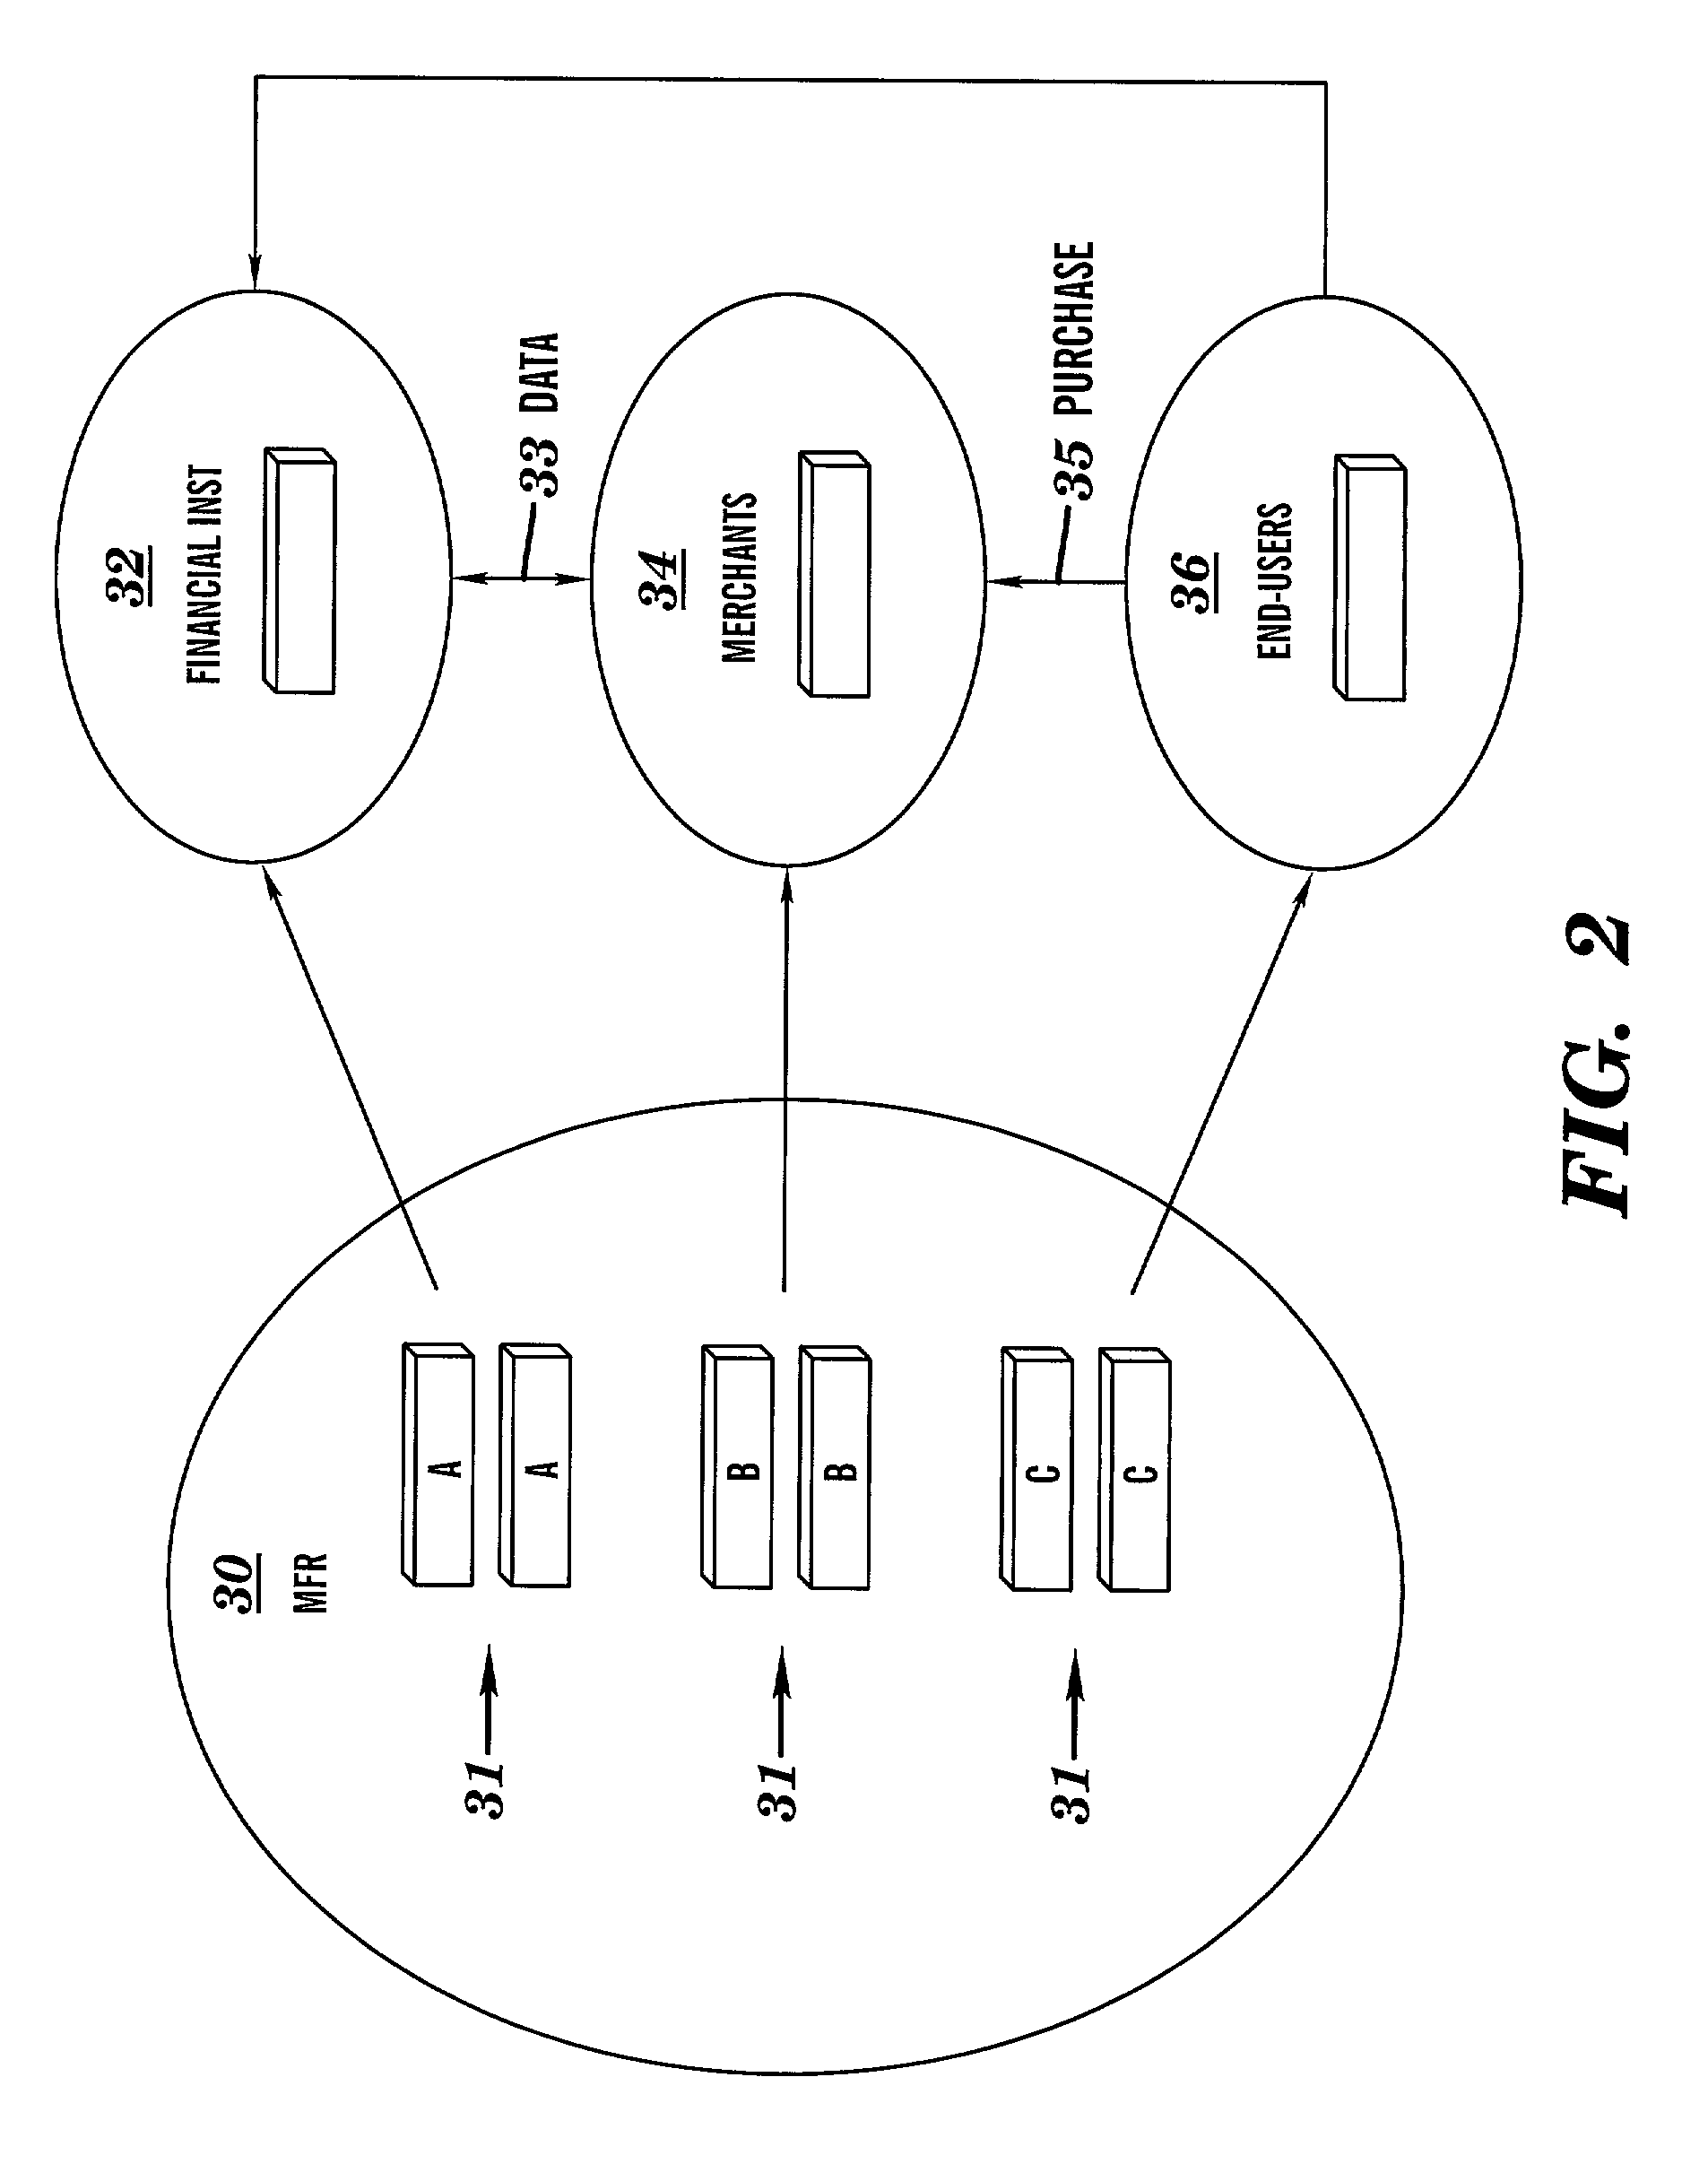 Secure system and method for enforcement of privacy policy and protection of confidentiality